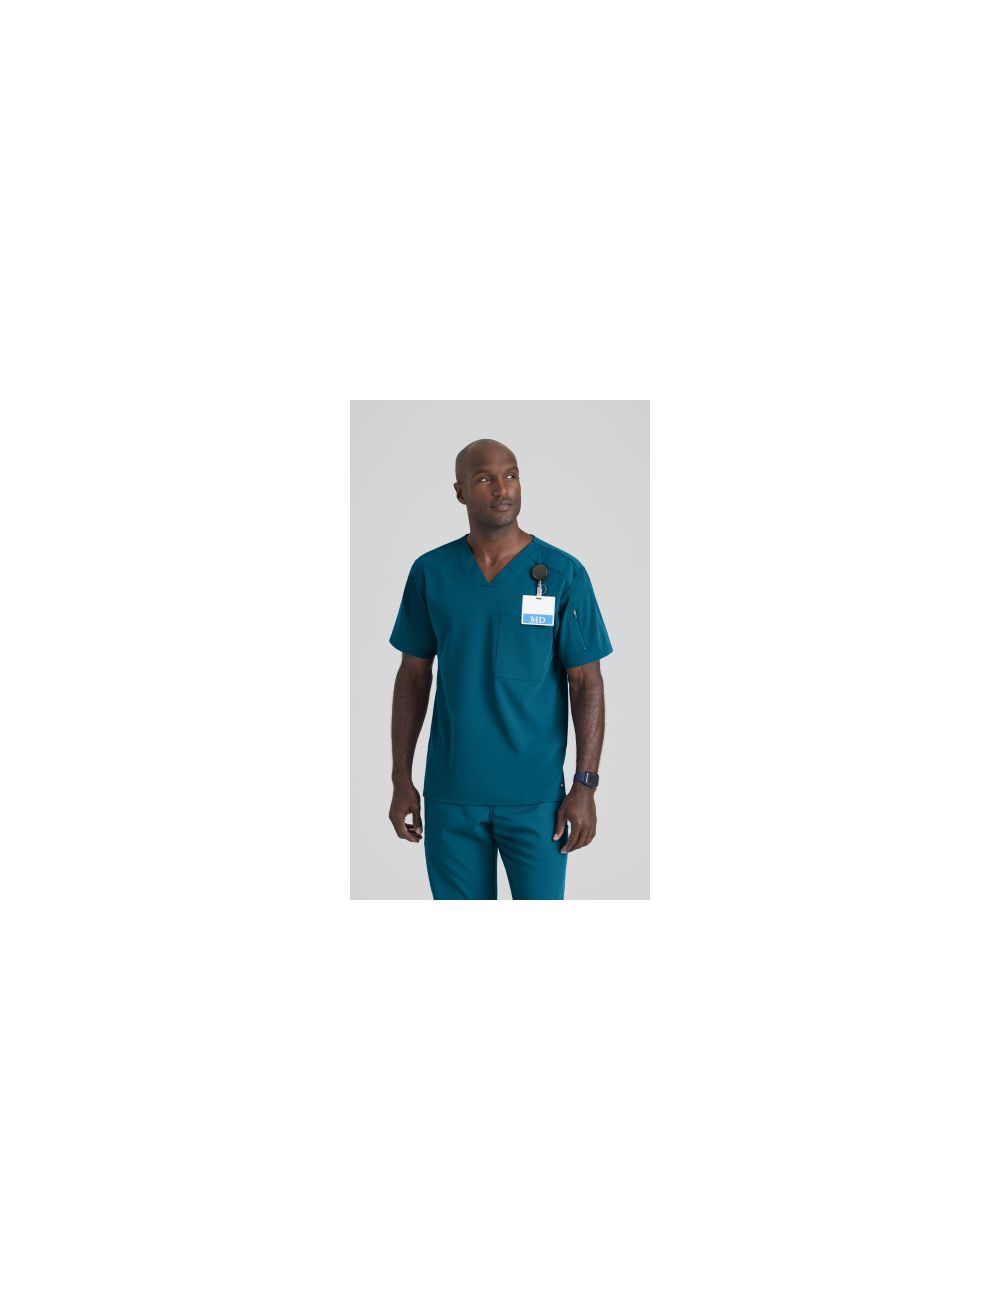 Medical gown man, collection "Grey's Anatomy Stretch" (GRST079-)